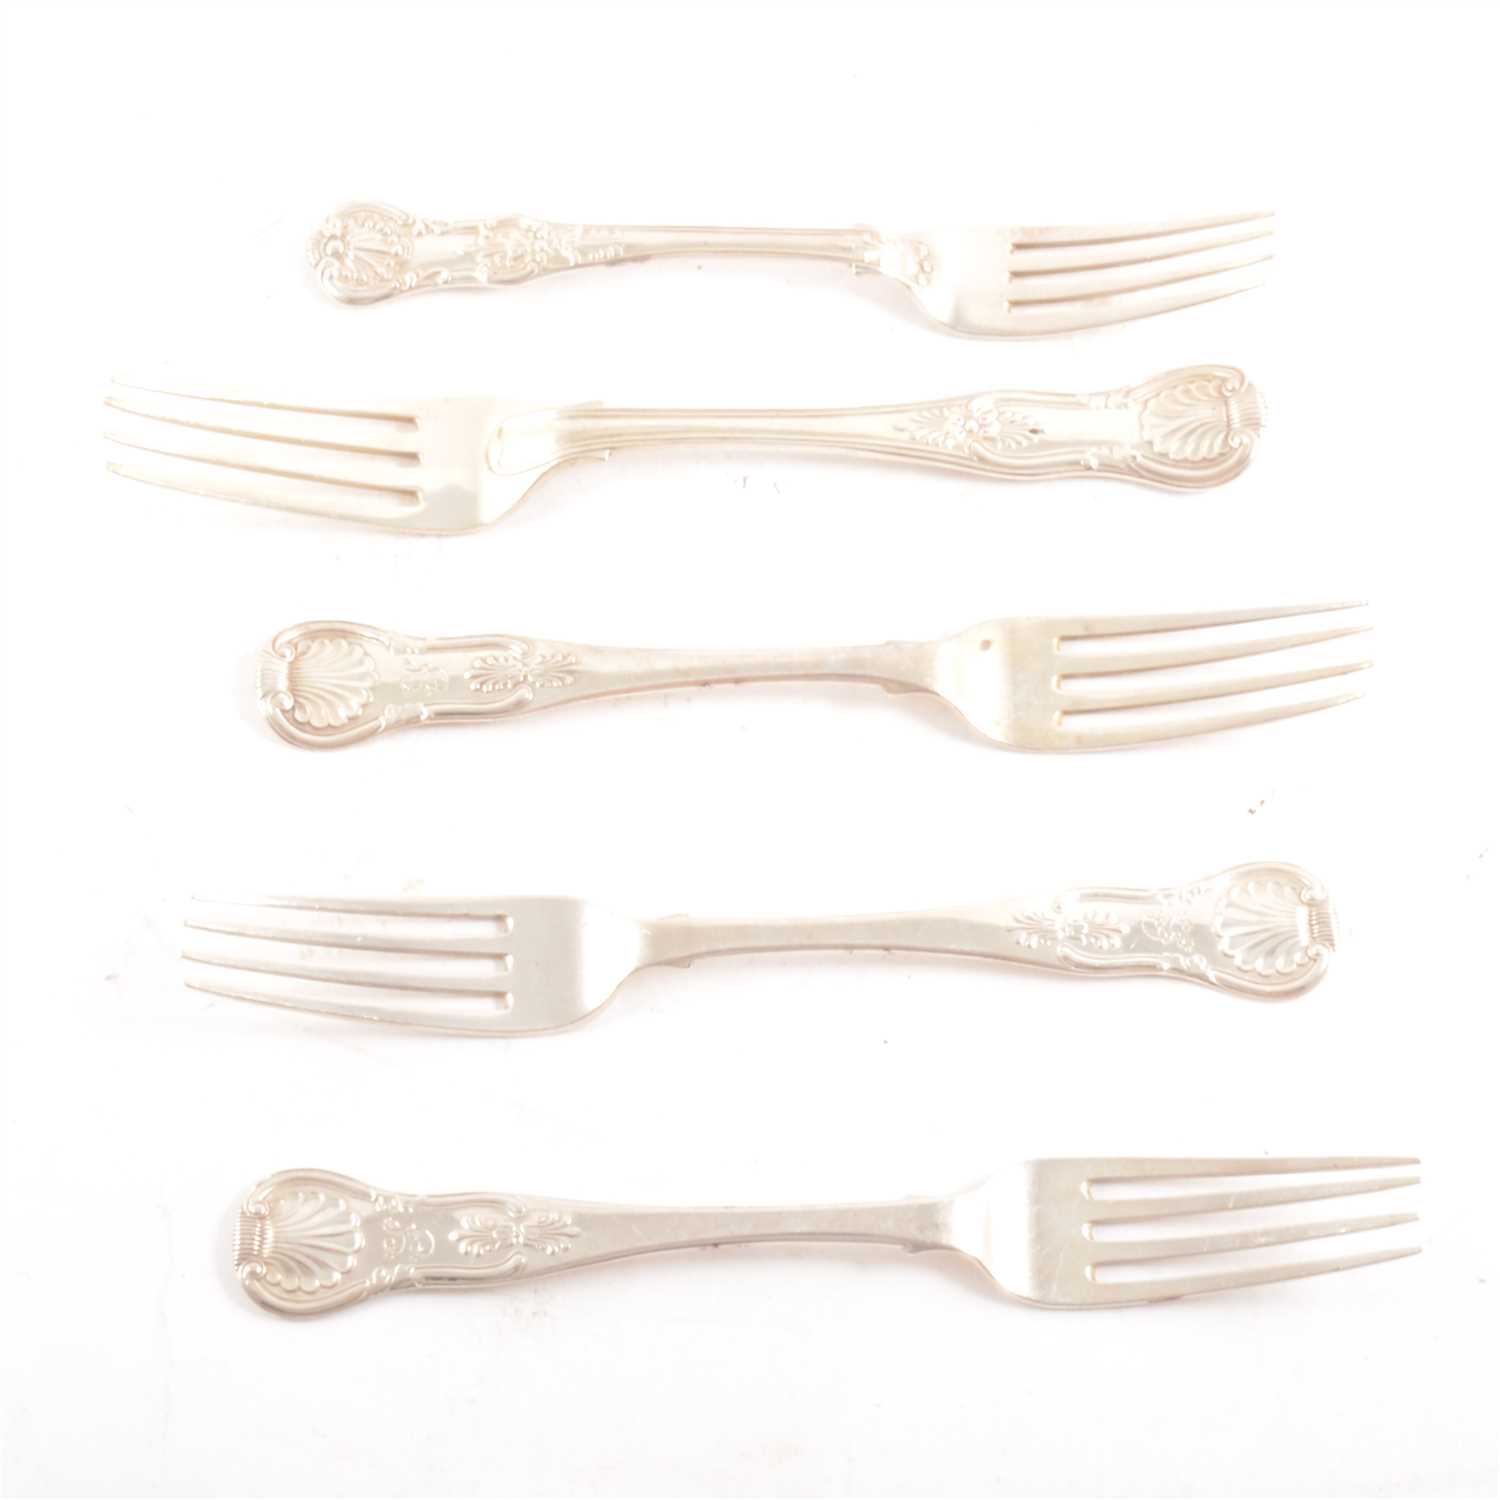 Lot 201 - A quantity of silver and silver-plated flatware in variations of the Kings Pattern